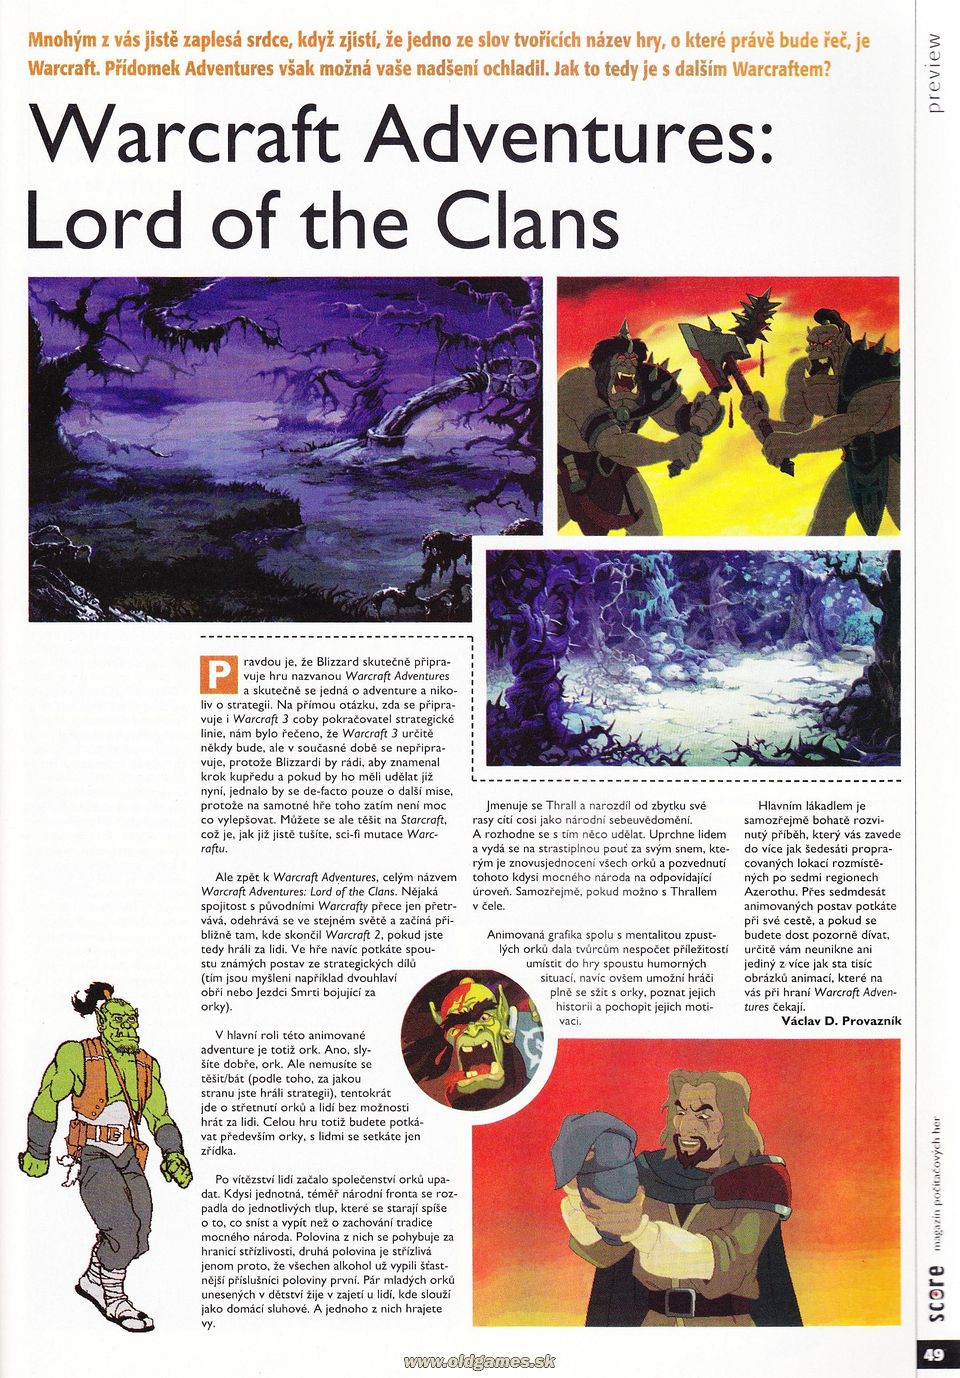 Preview: Warcraft Adventures: Lord of the Clans